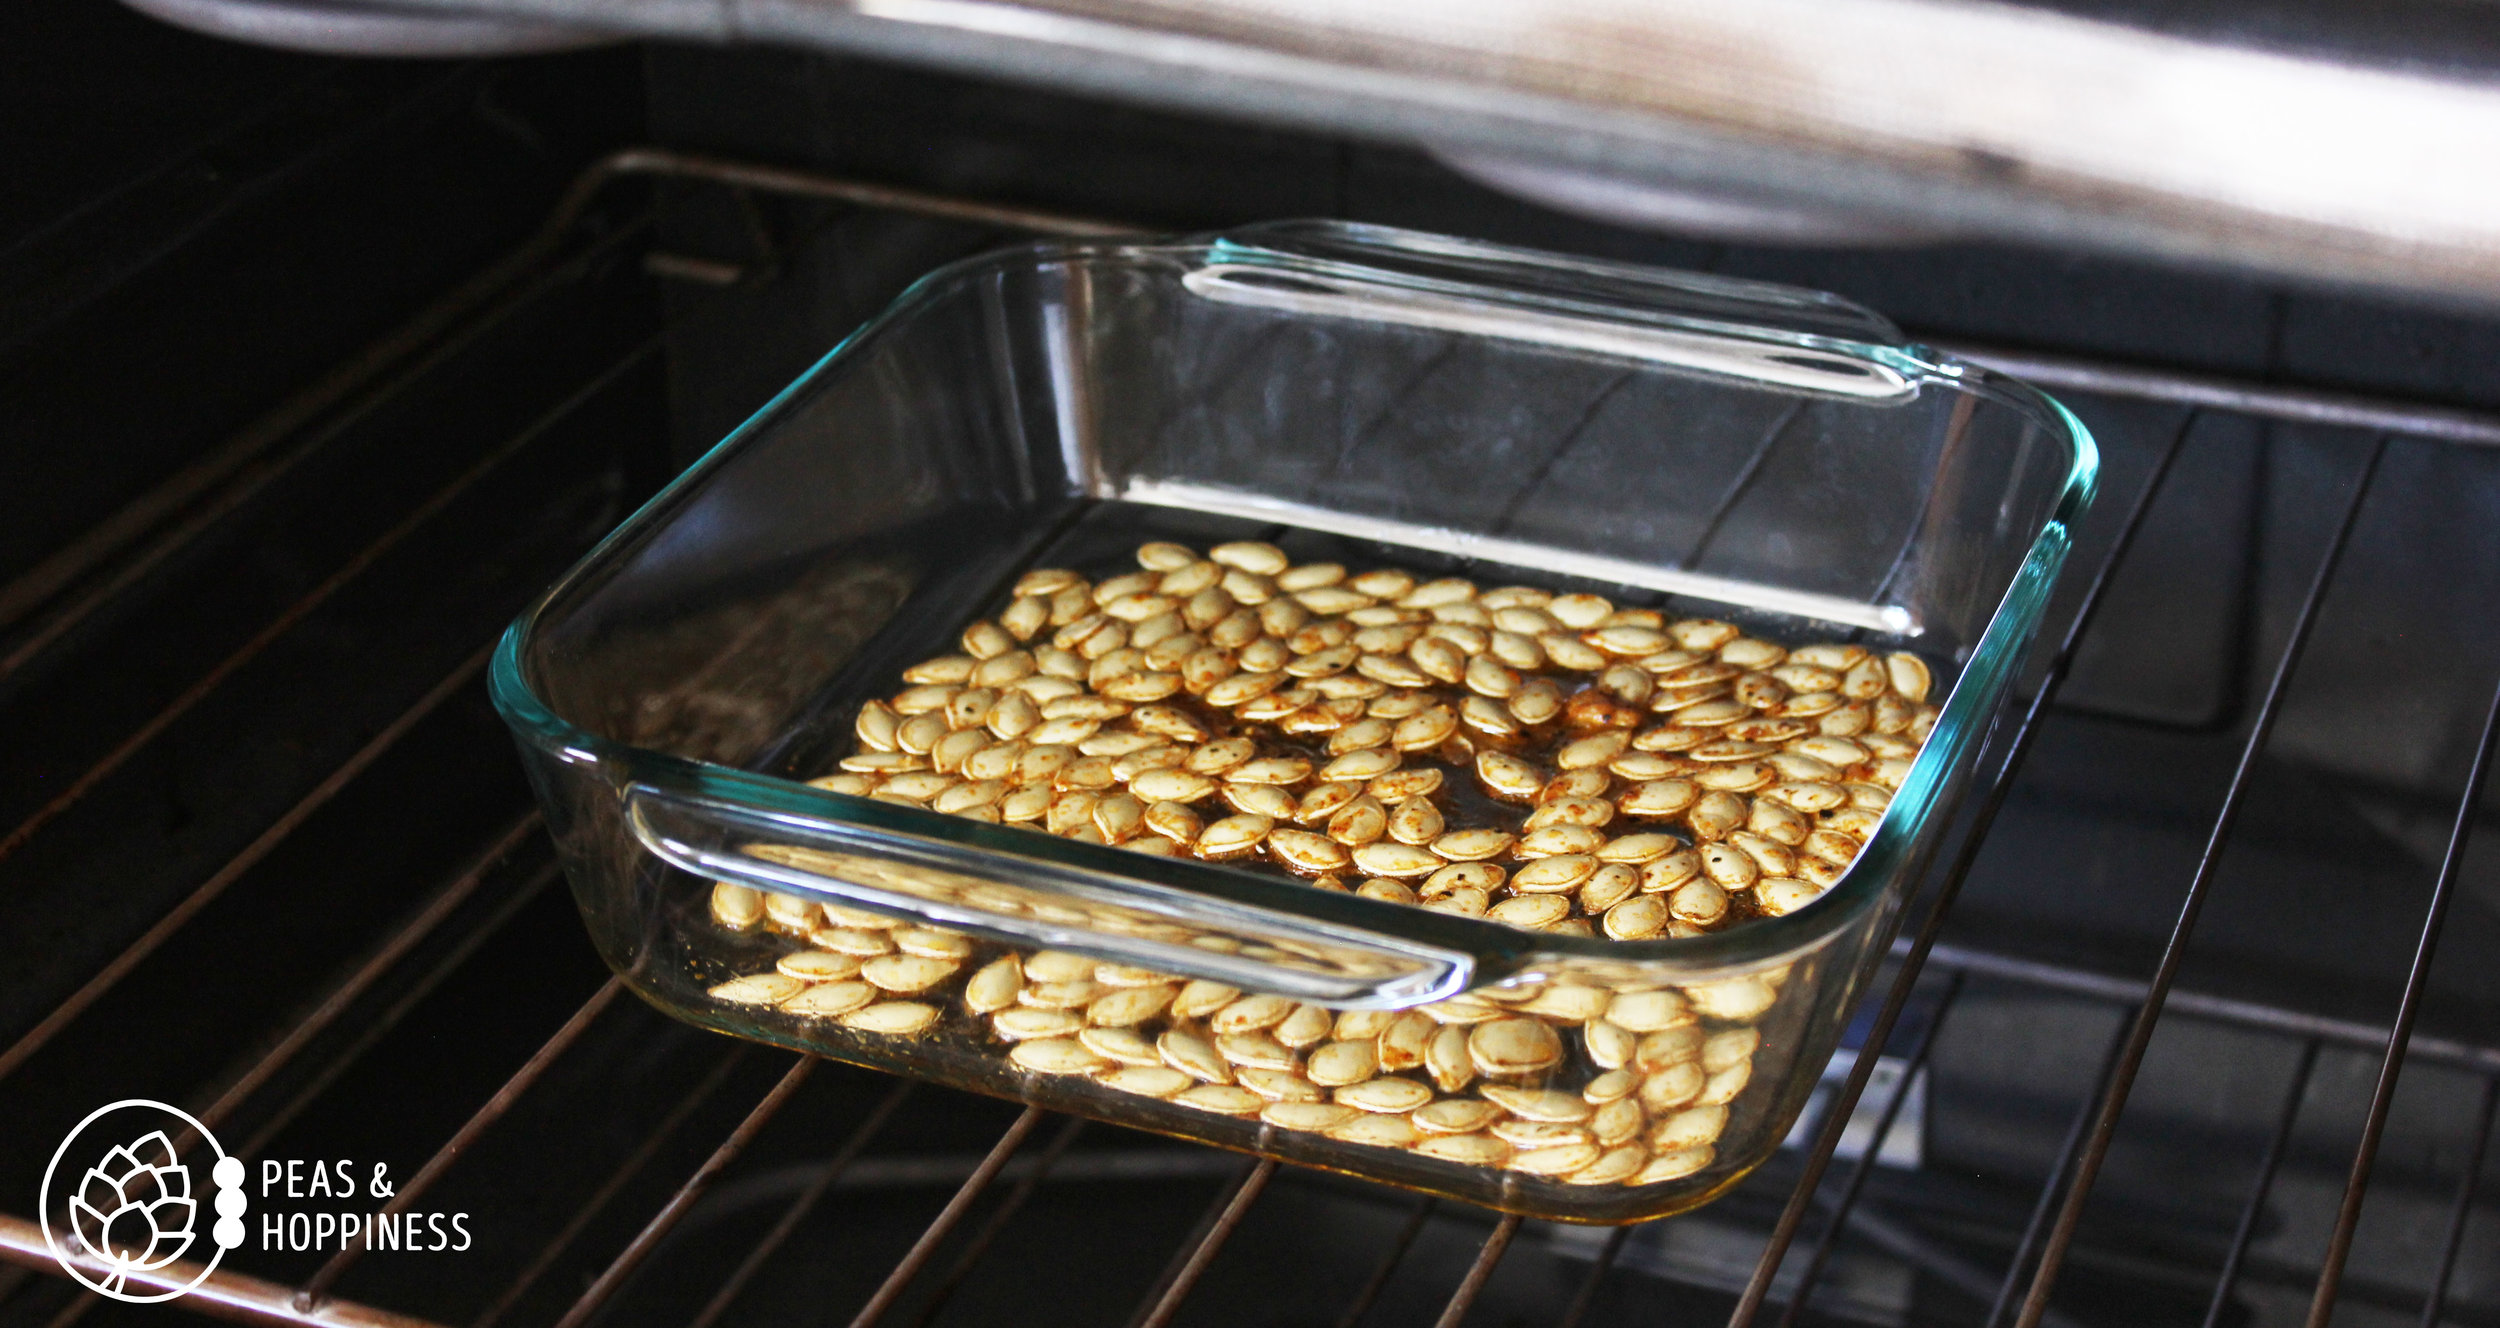 Savory Roasted Pumpkin Seeds from Peas and Hoppiness - www.peasandhoppiness.com